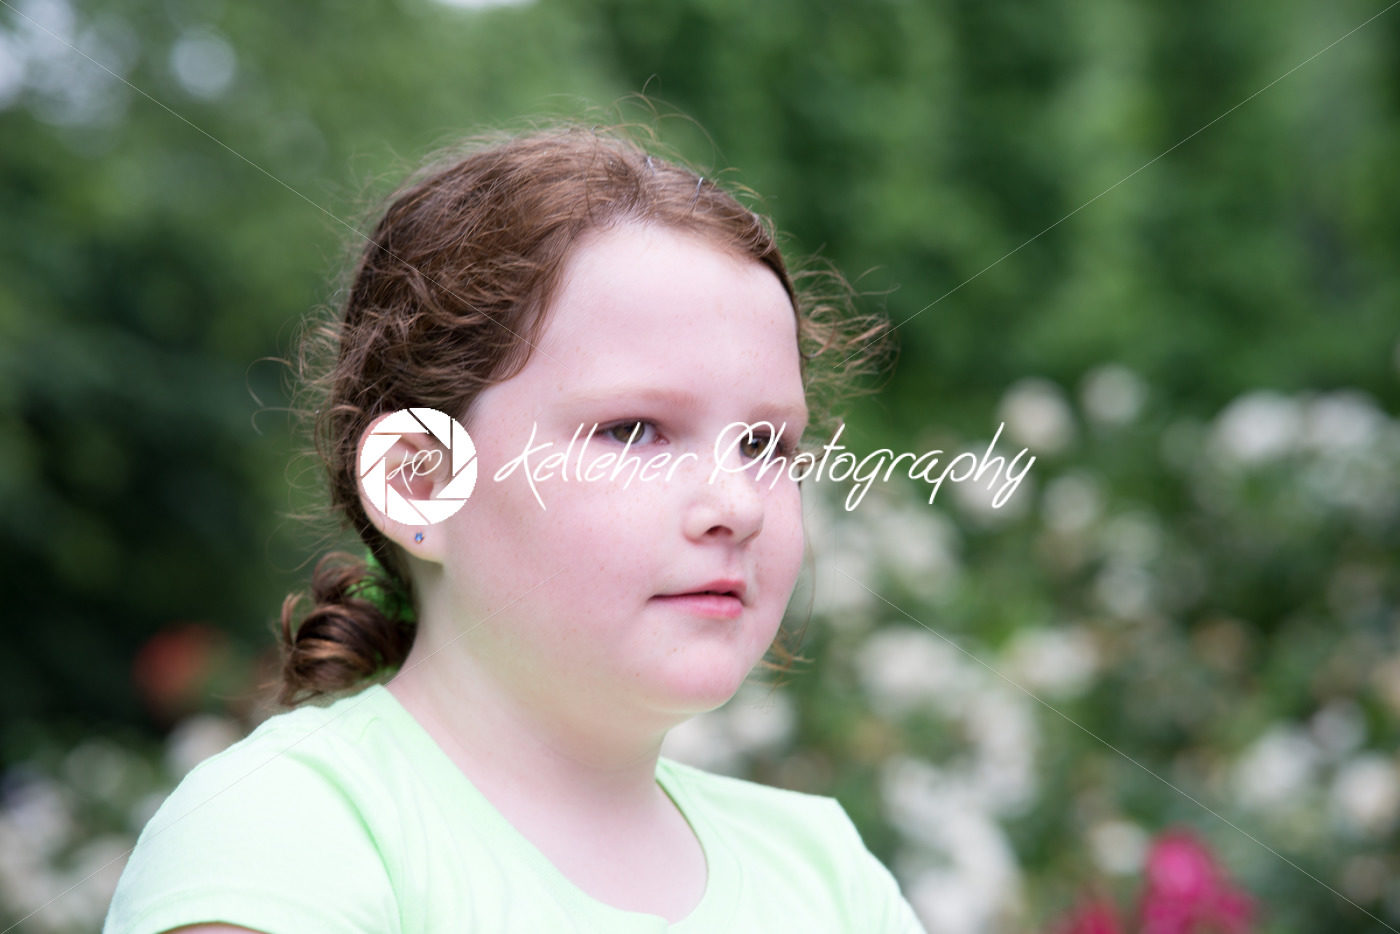 Close-up portrait of a cute girl looking away - Kelleher Photography Store